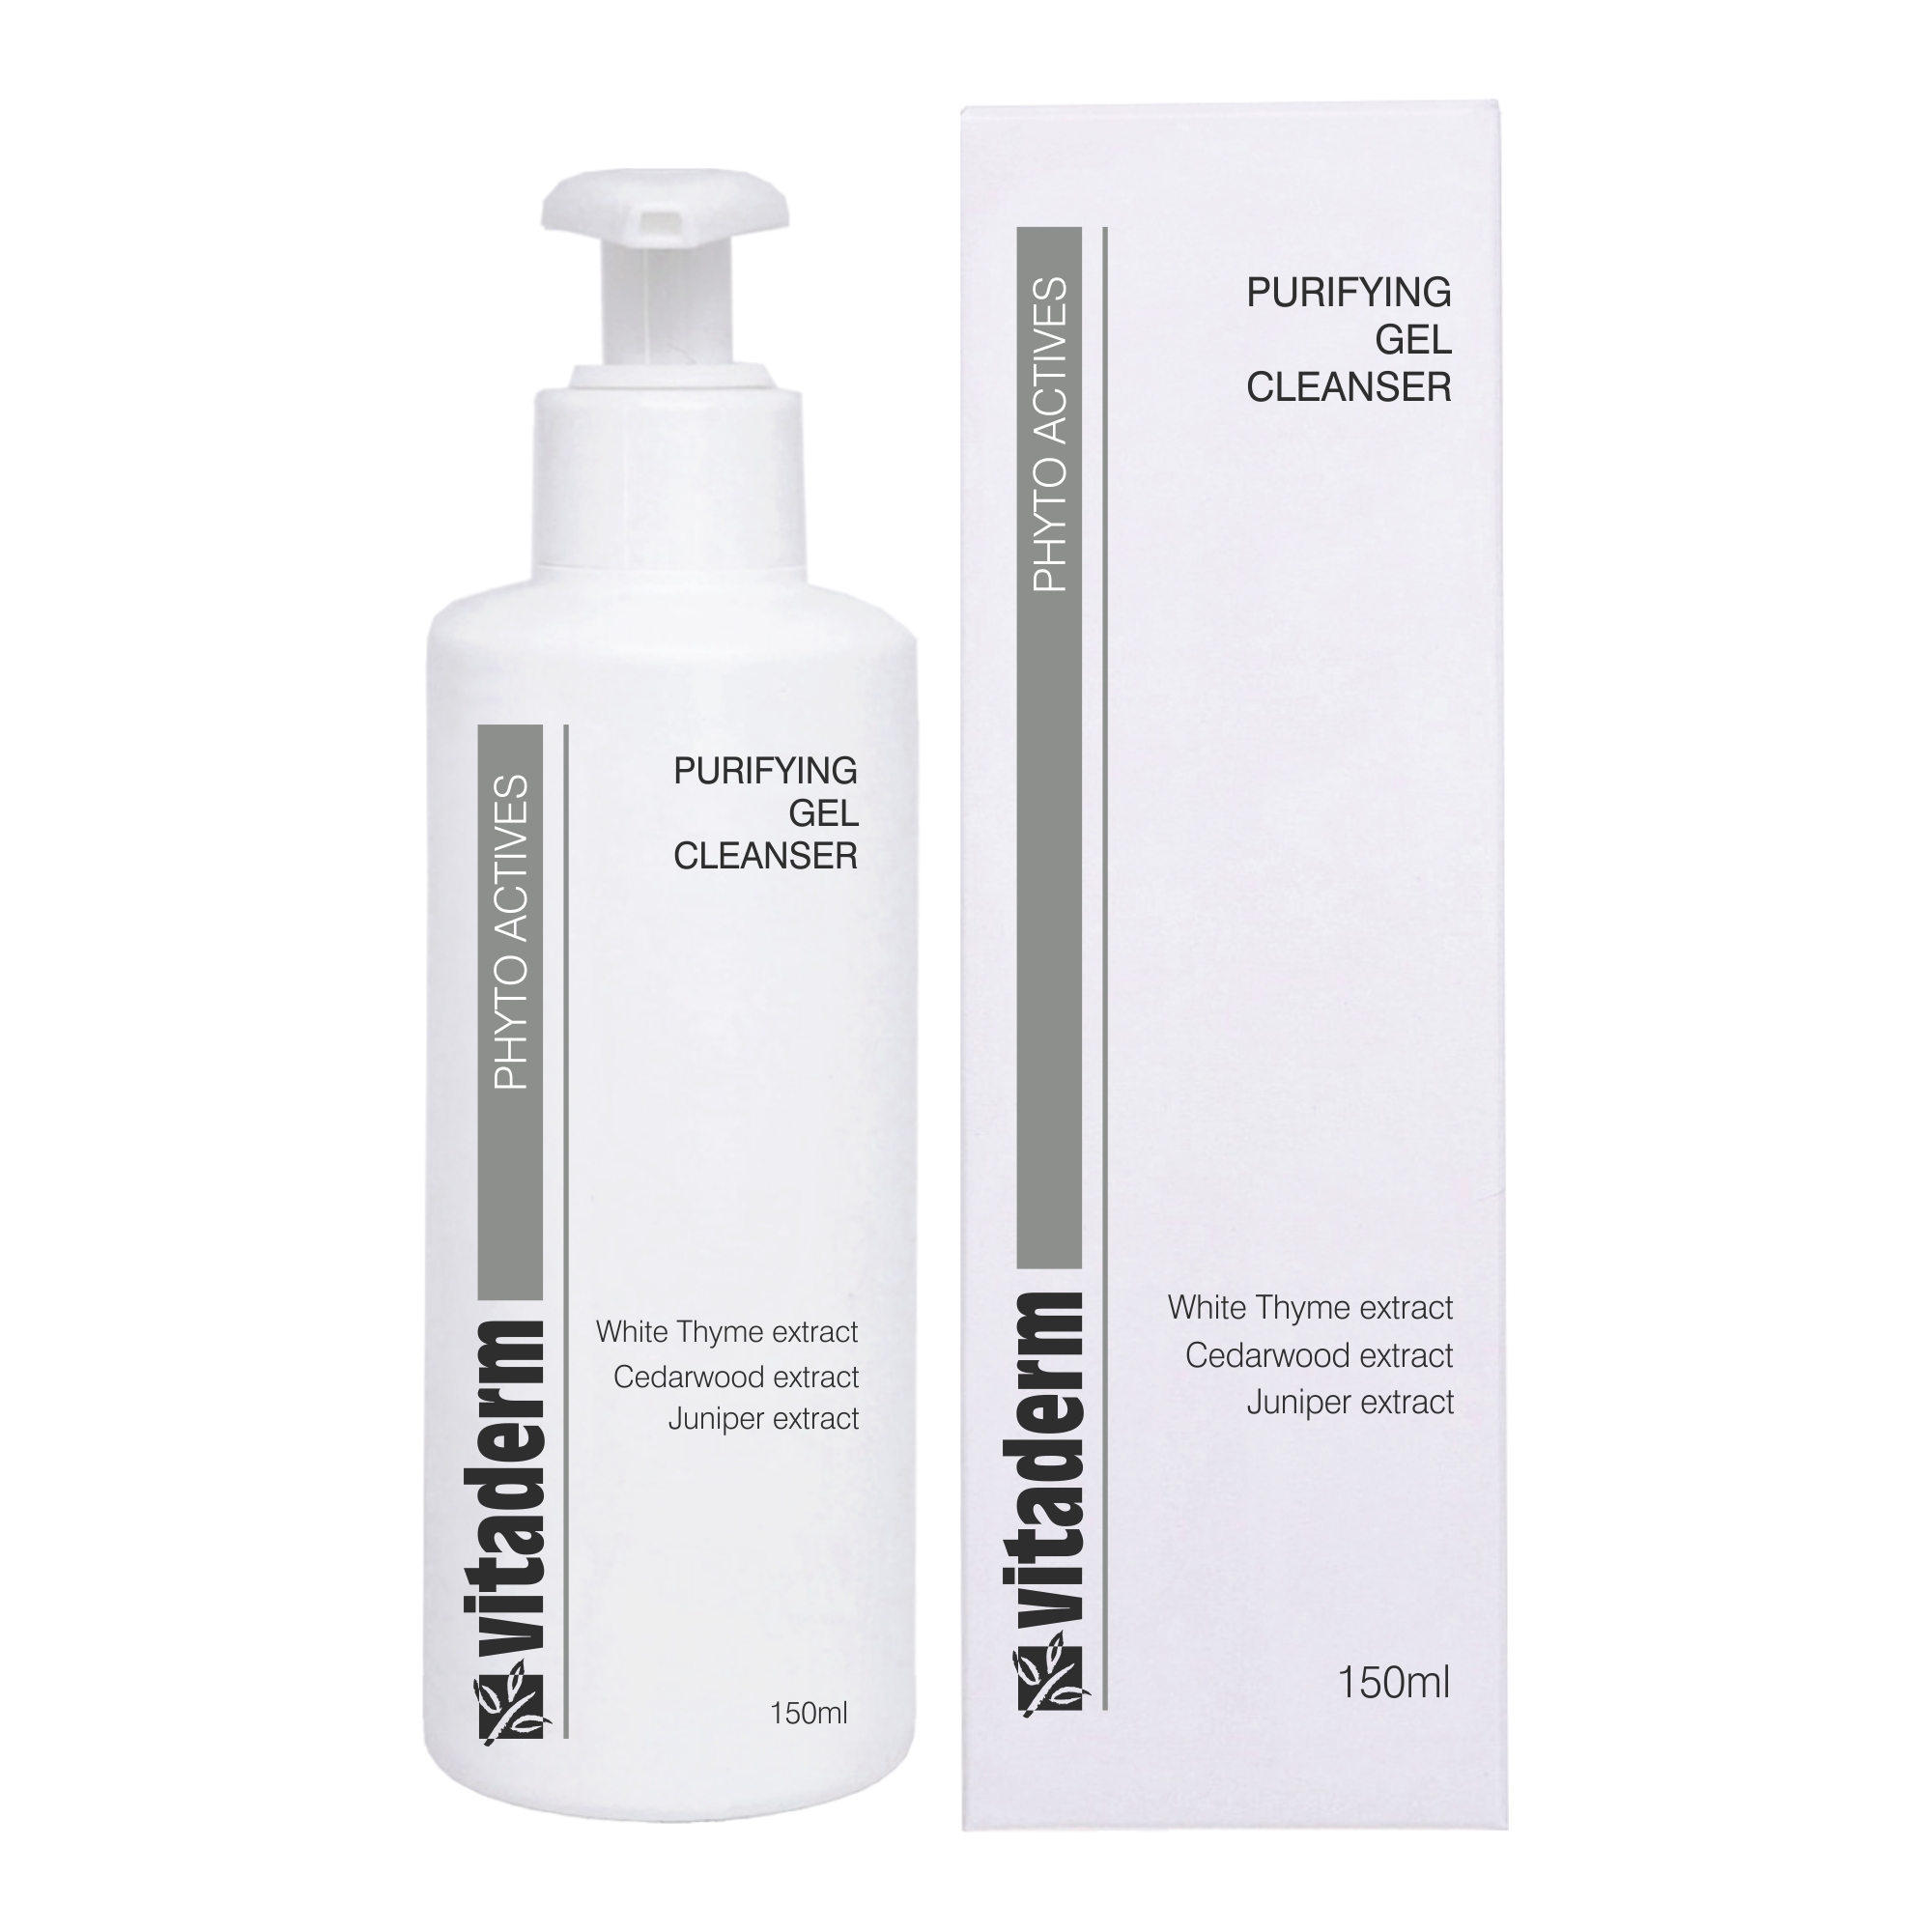 cleanser-purifying-cleanser